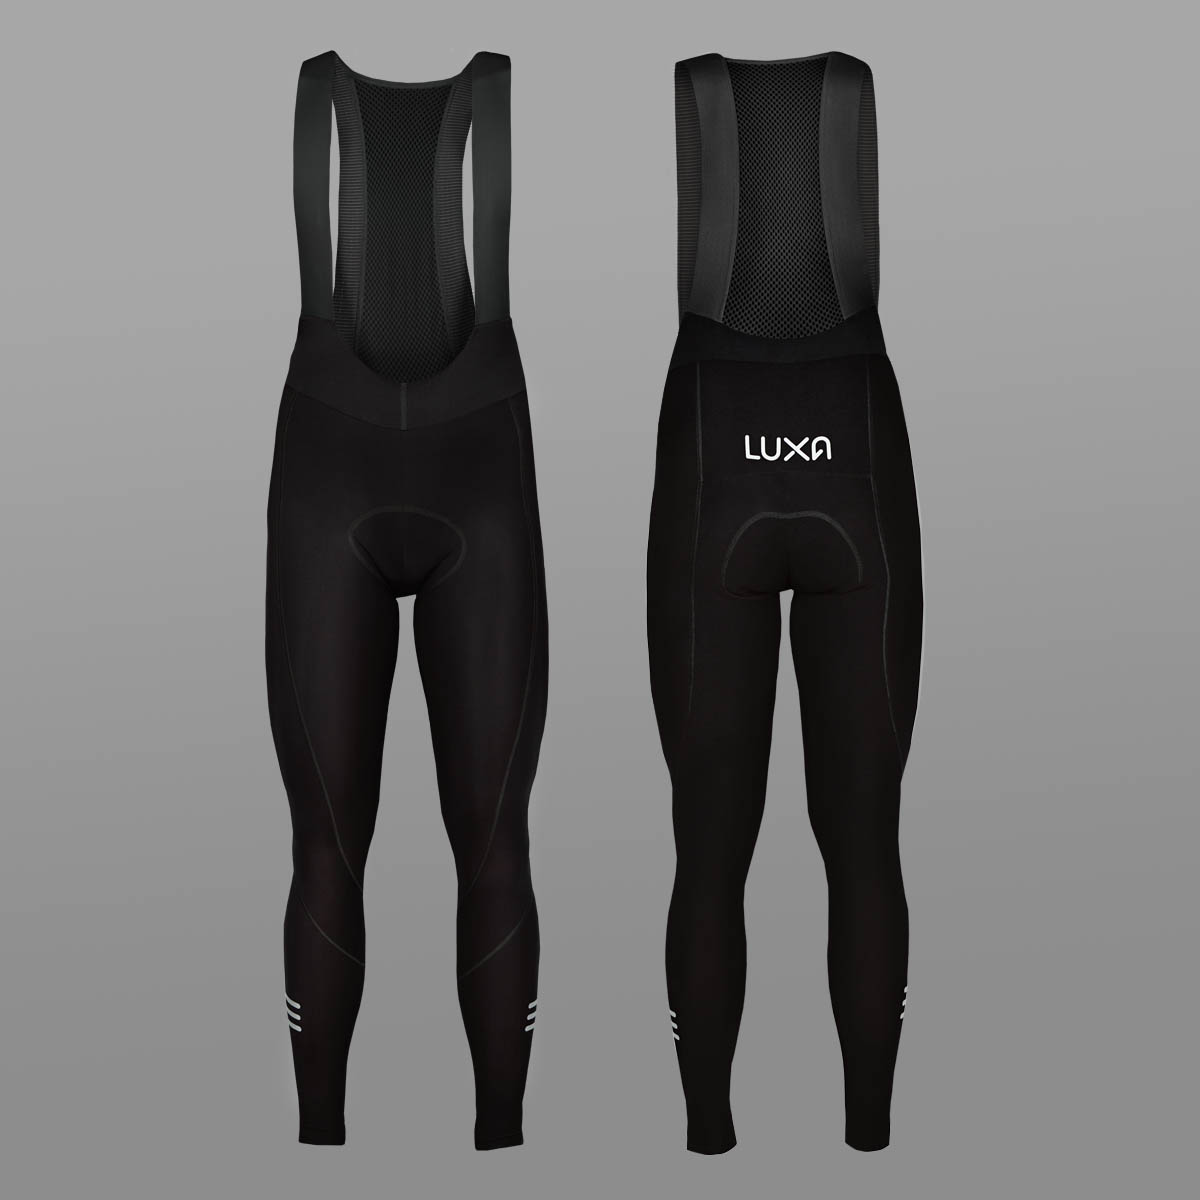 Insulated cycling tights to ride in chill weather in European autumn season